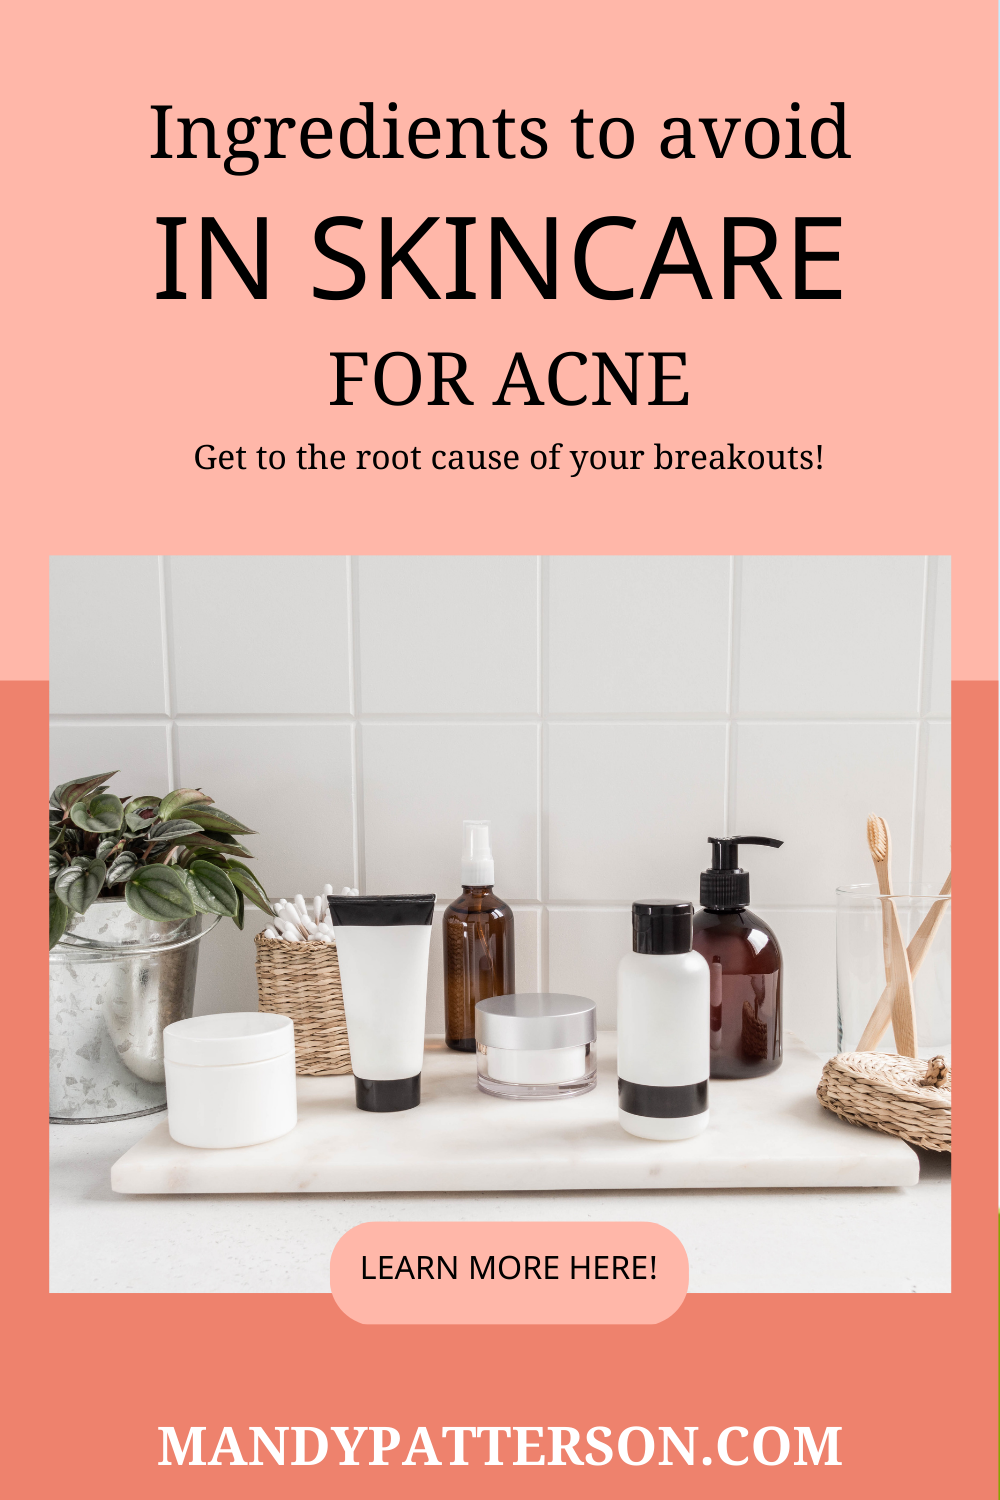 Ingredients to Avoid in Skincare for Acne